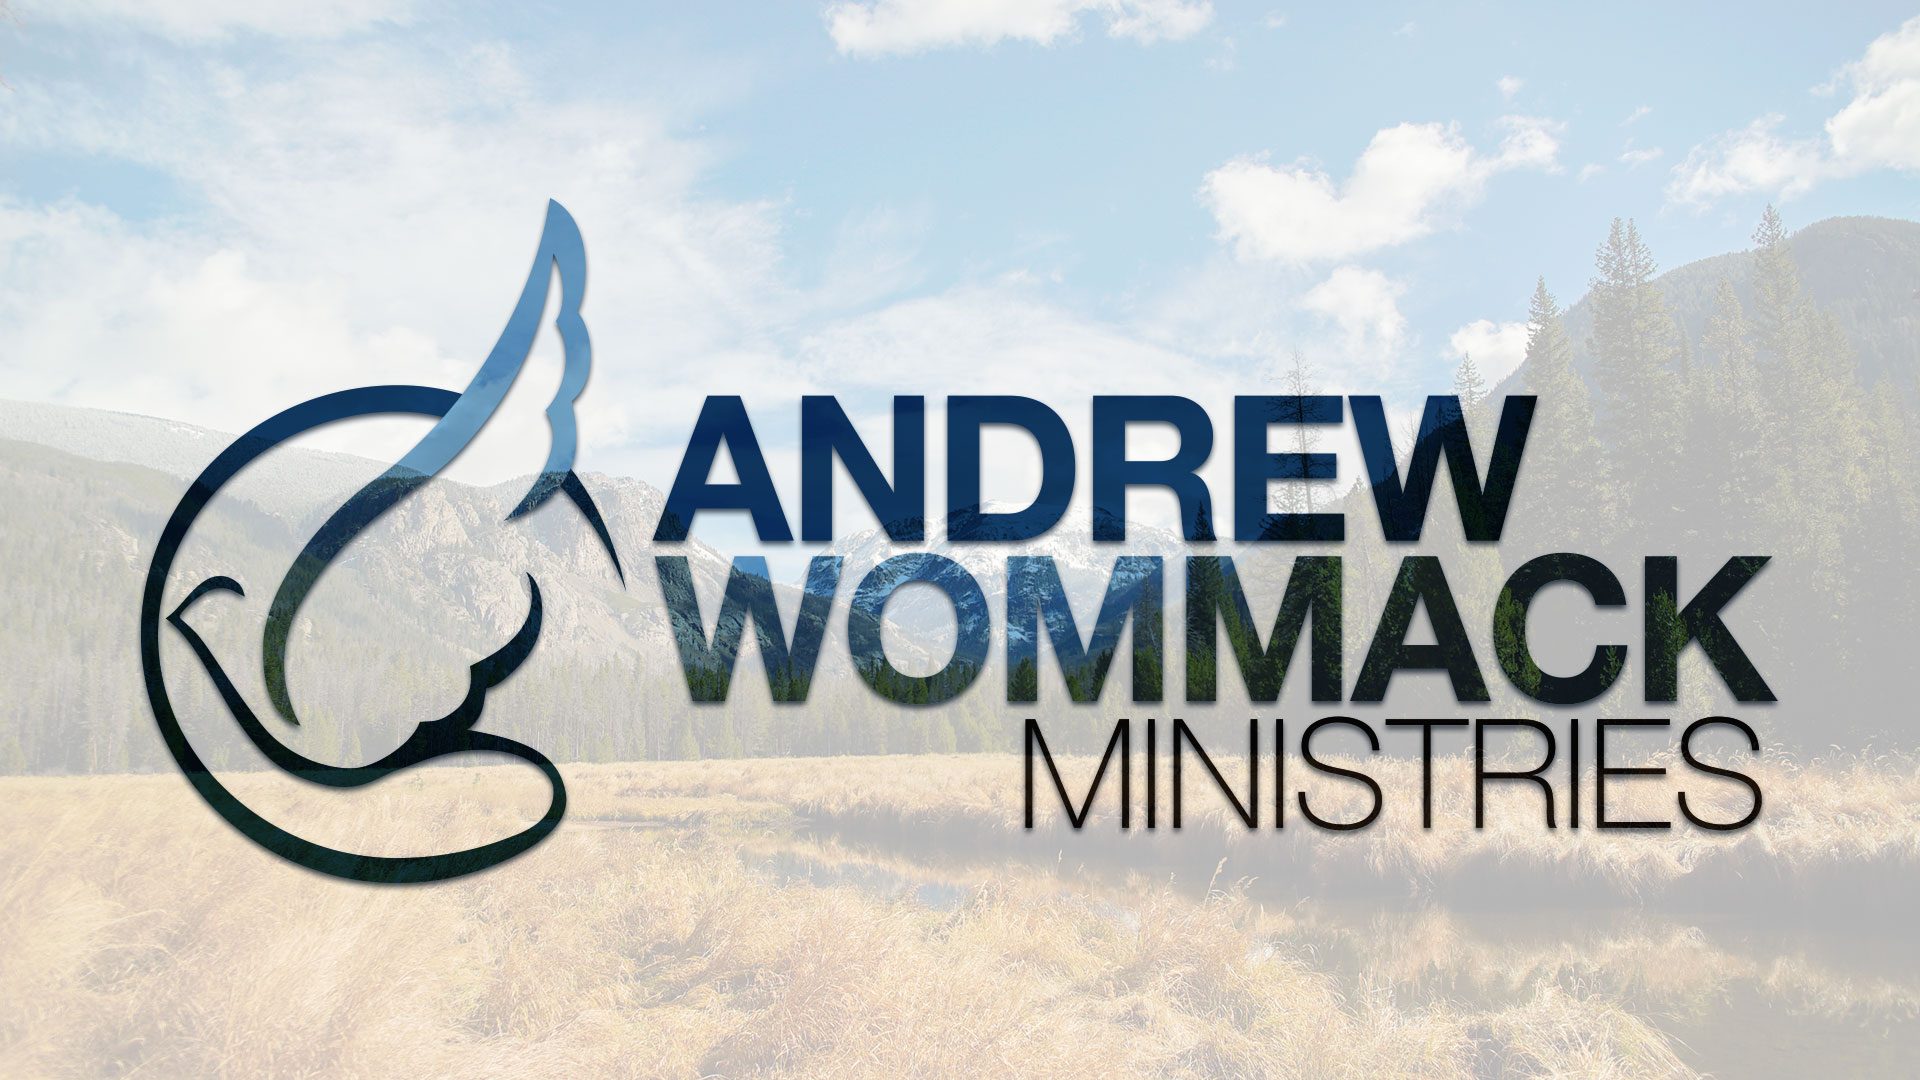 Andrew Wommack Ministries: Home